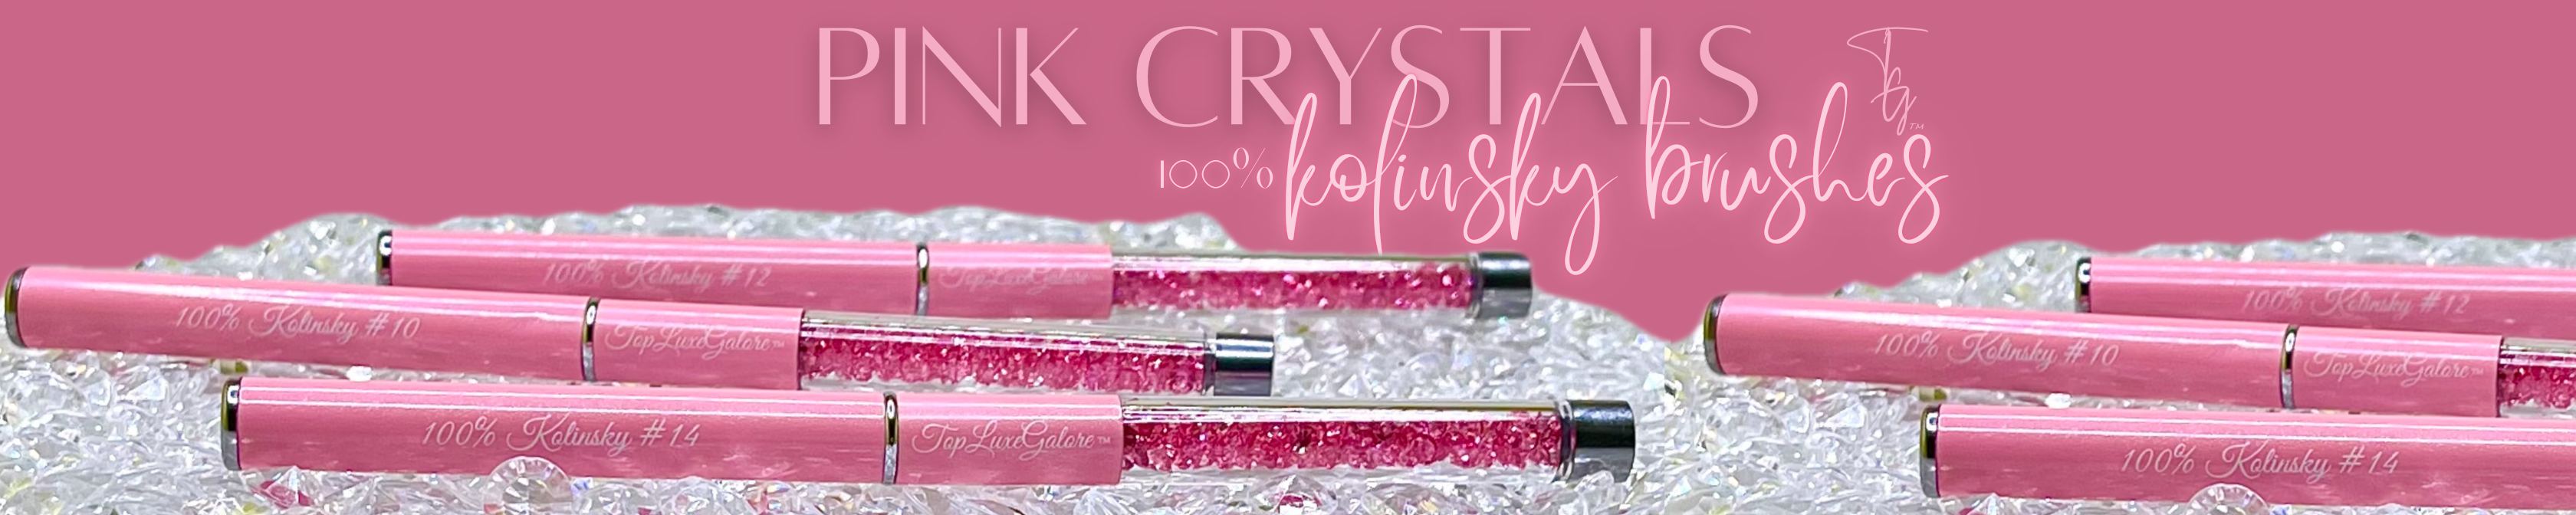 0953360672988-pinkcrystals-ecommerce-page-header-35-×-8-in.png